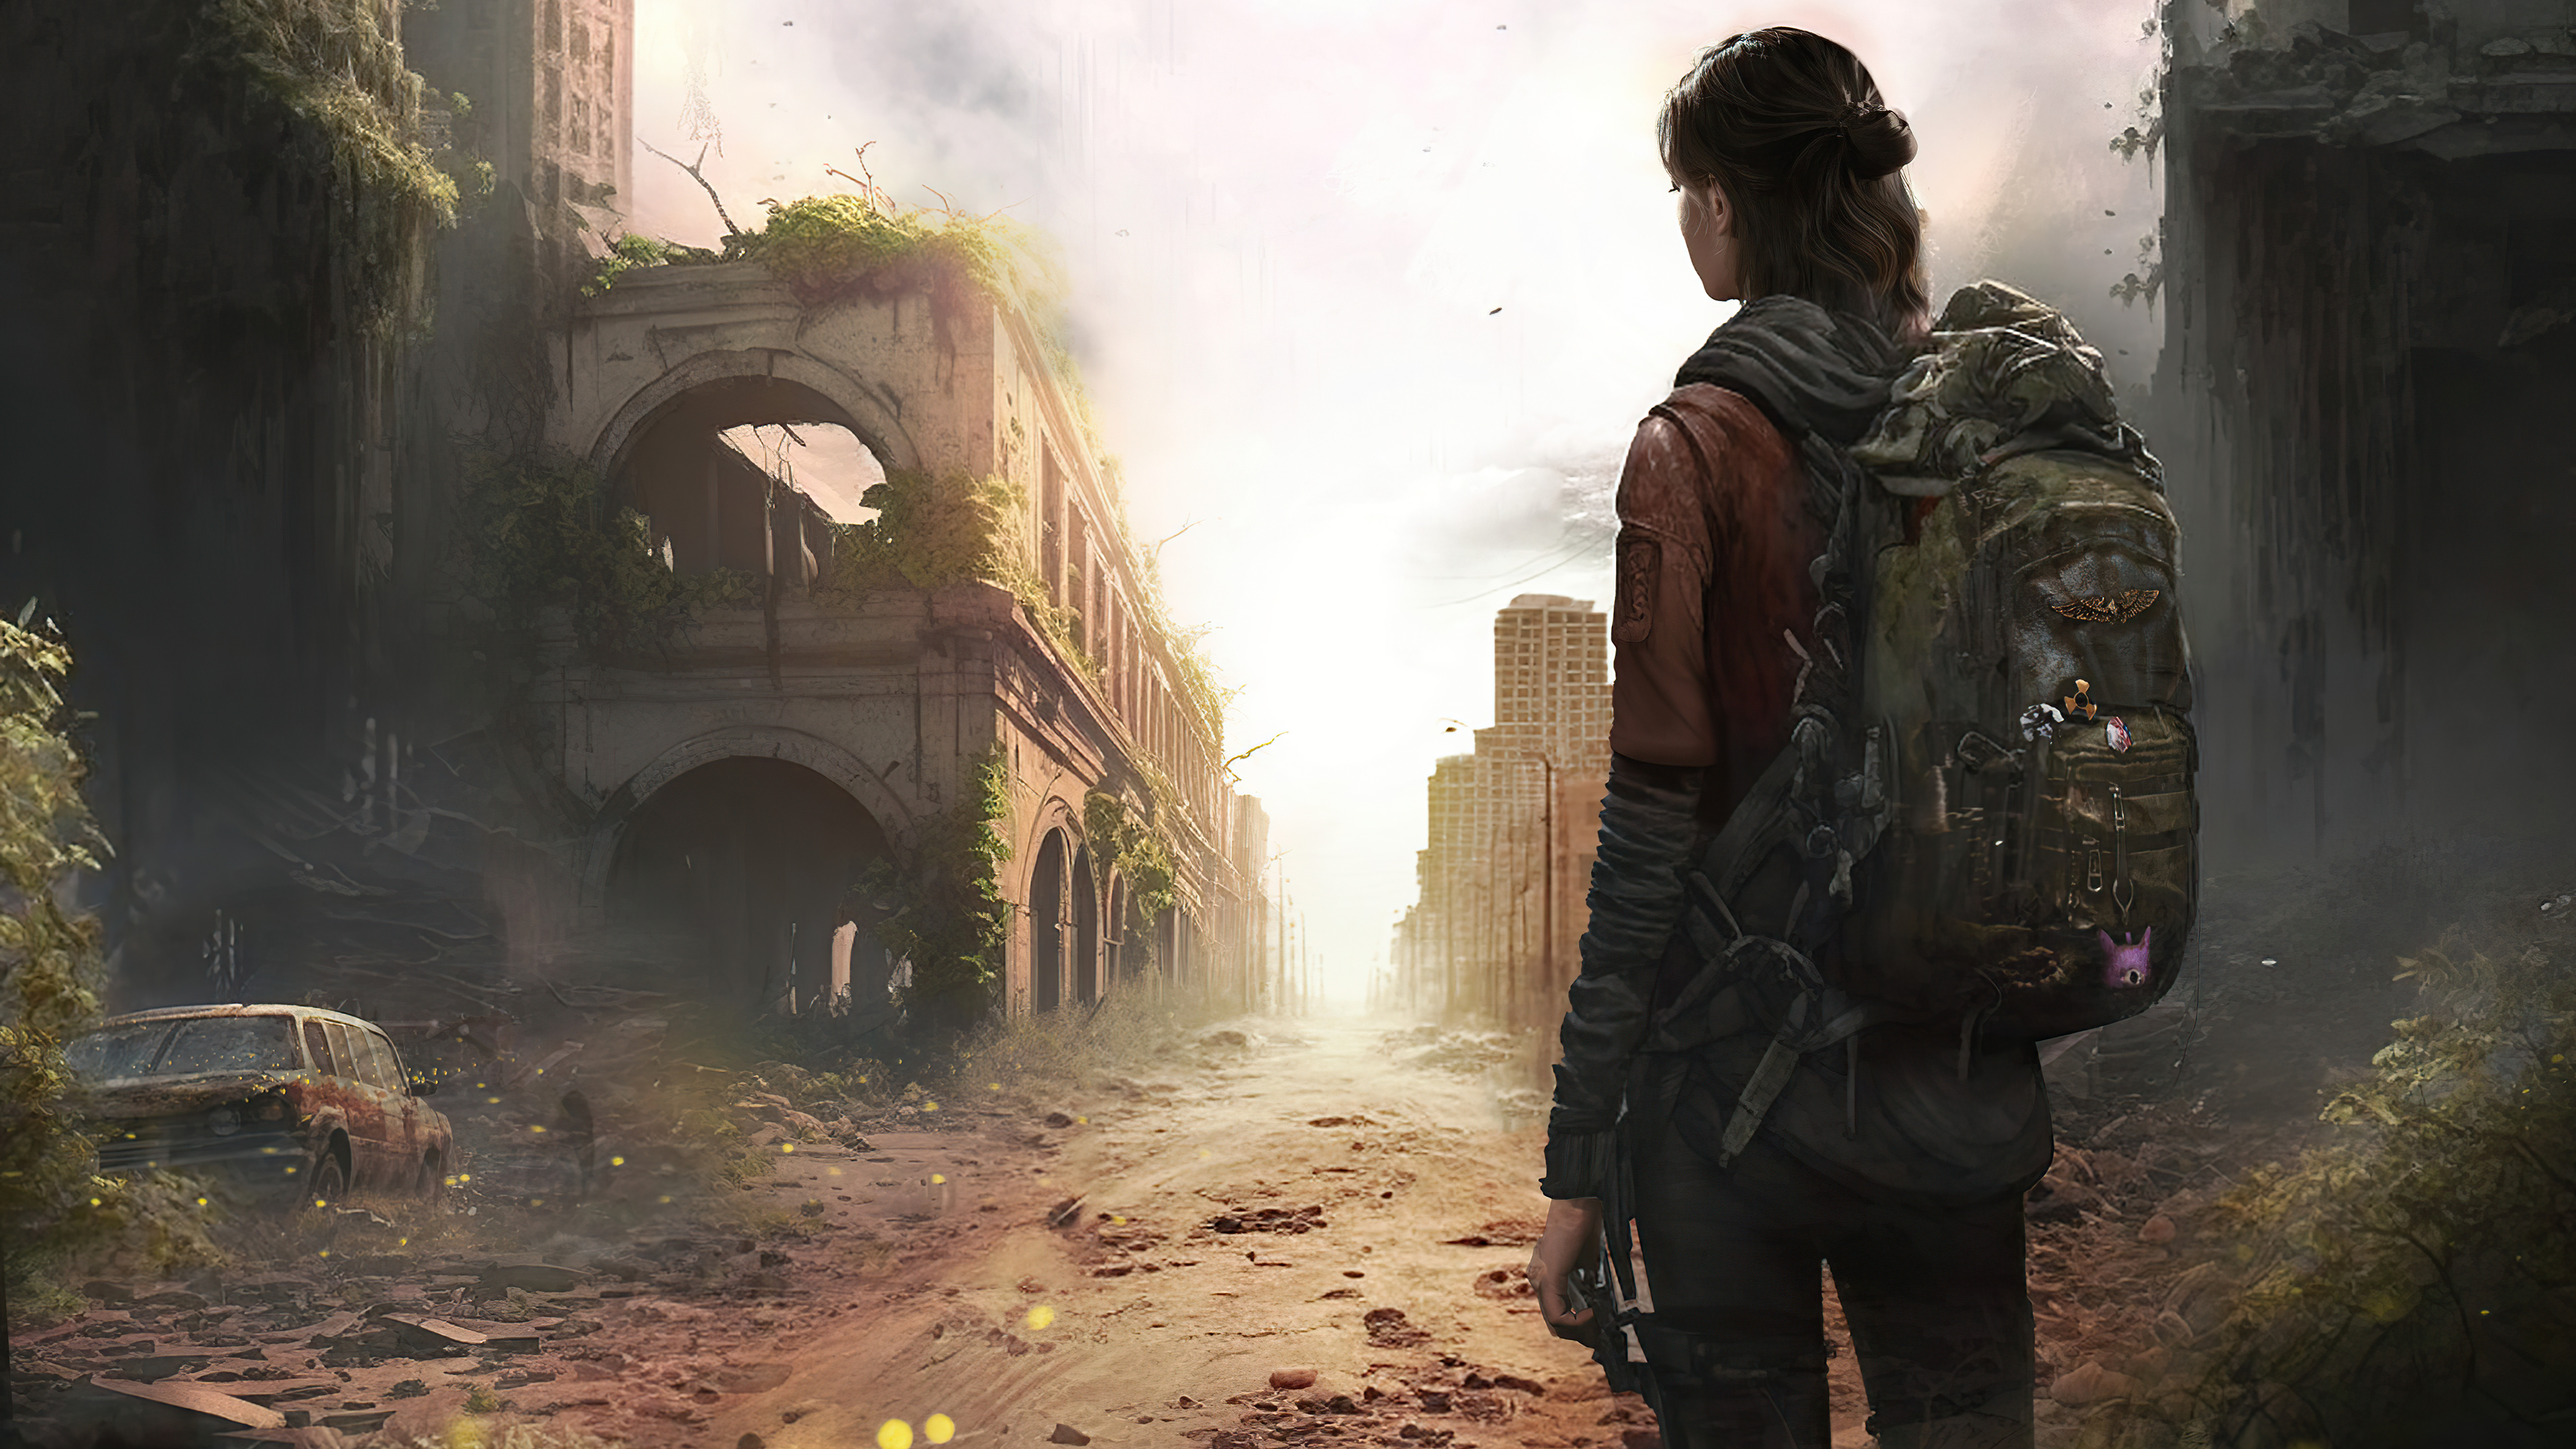 Download wallpaper 1280x2120 hbo original, the last of us, zombie series,  iphone 6 plus, 1280x2120 hd background, 29504